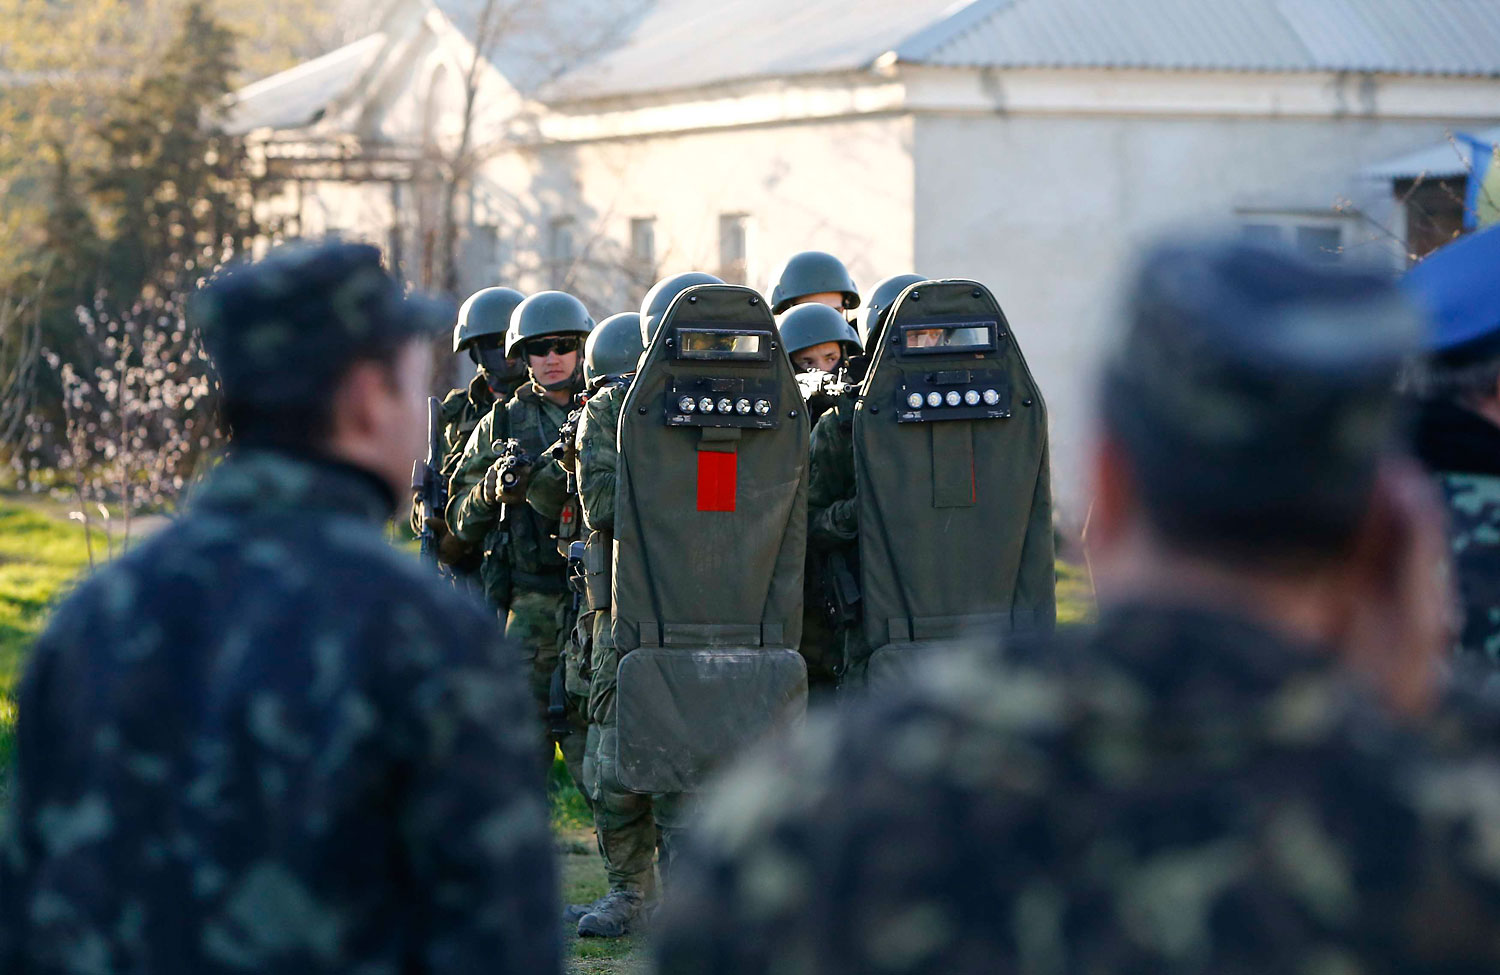 Armed men, believed to be Russian servicemen, stand guard, with Ukrainian servicemen seen in the foreground, at a military airbase, in the Crimean town of Belbek near Sevastopol